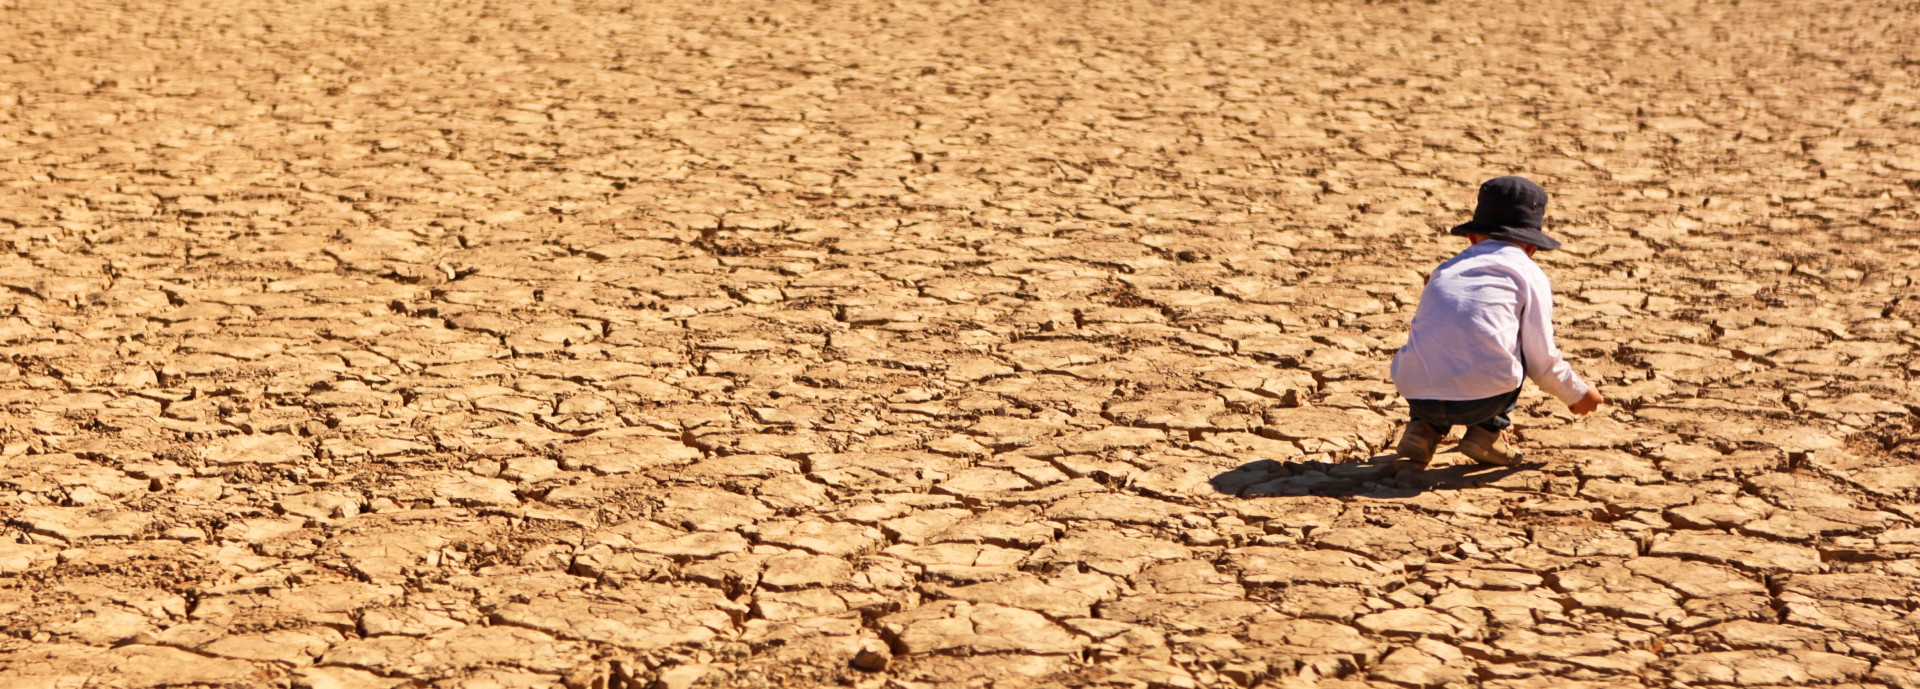 Child Playing on Dry Parched Desert Land stock photo